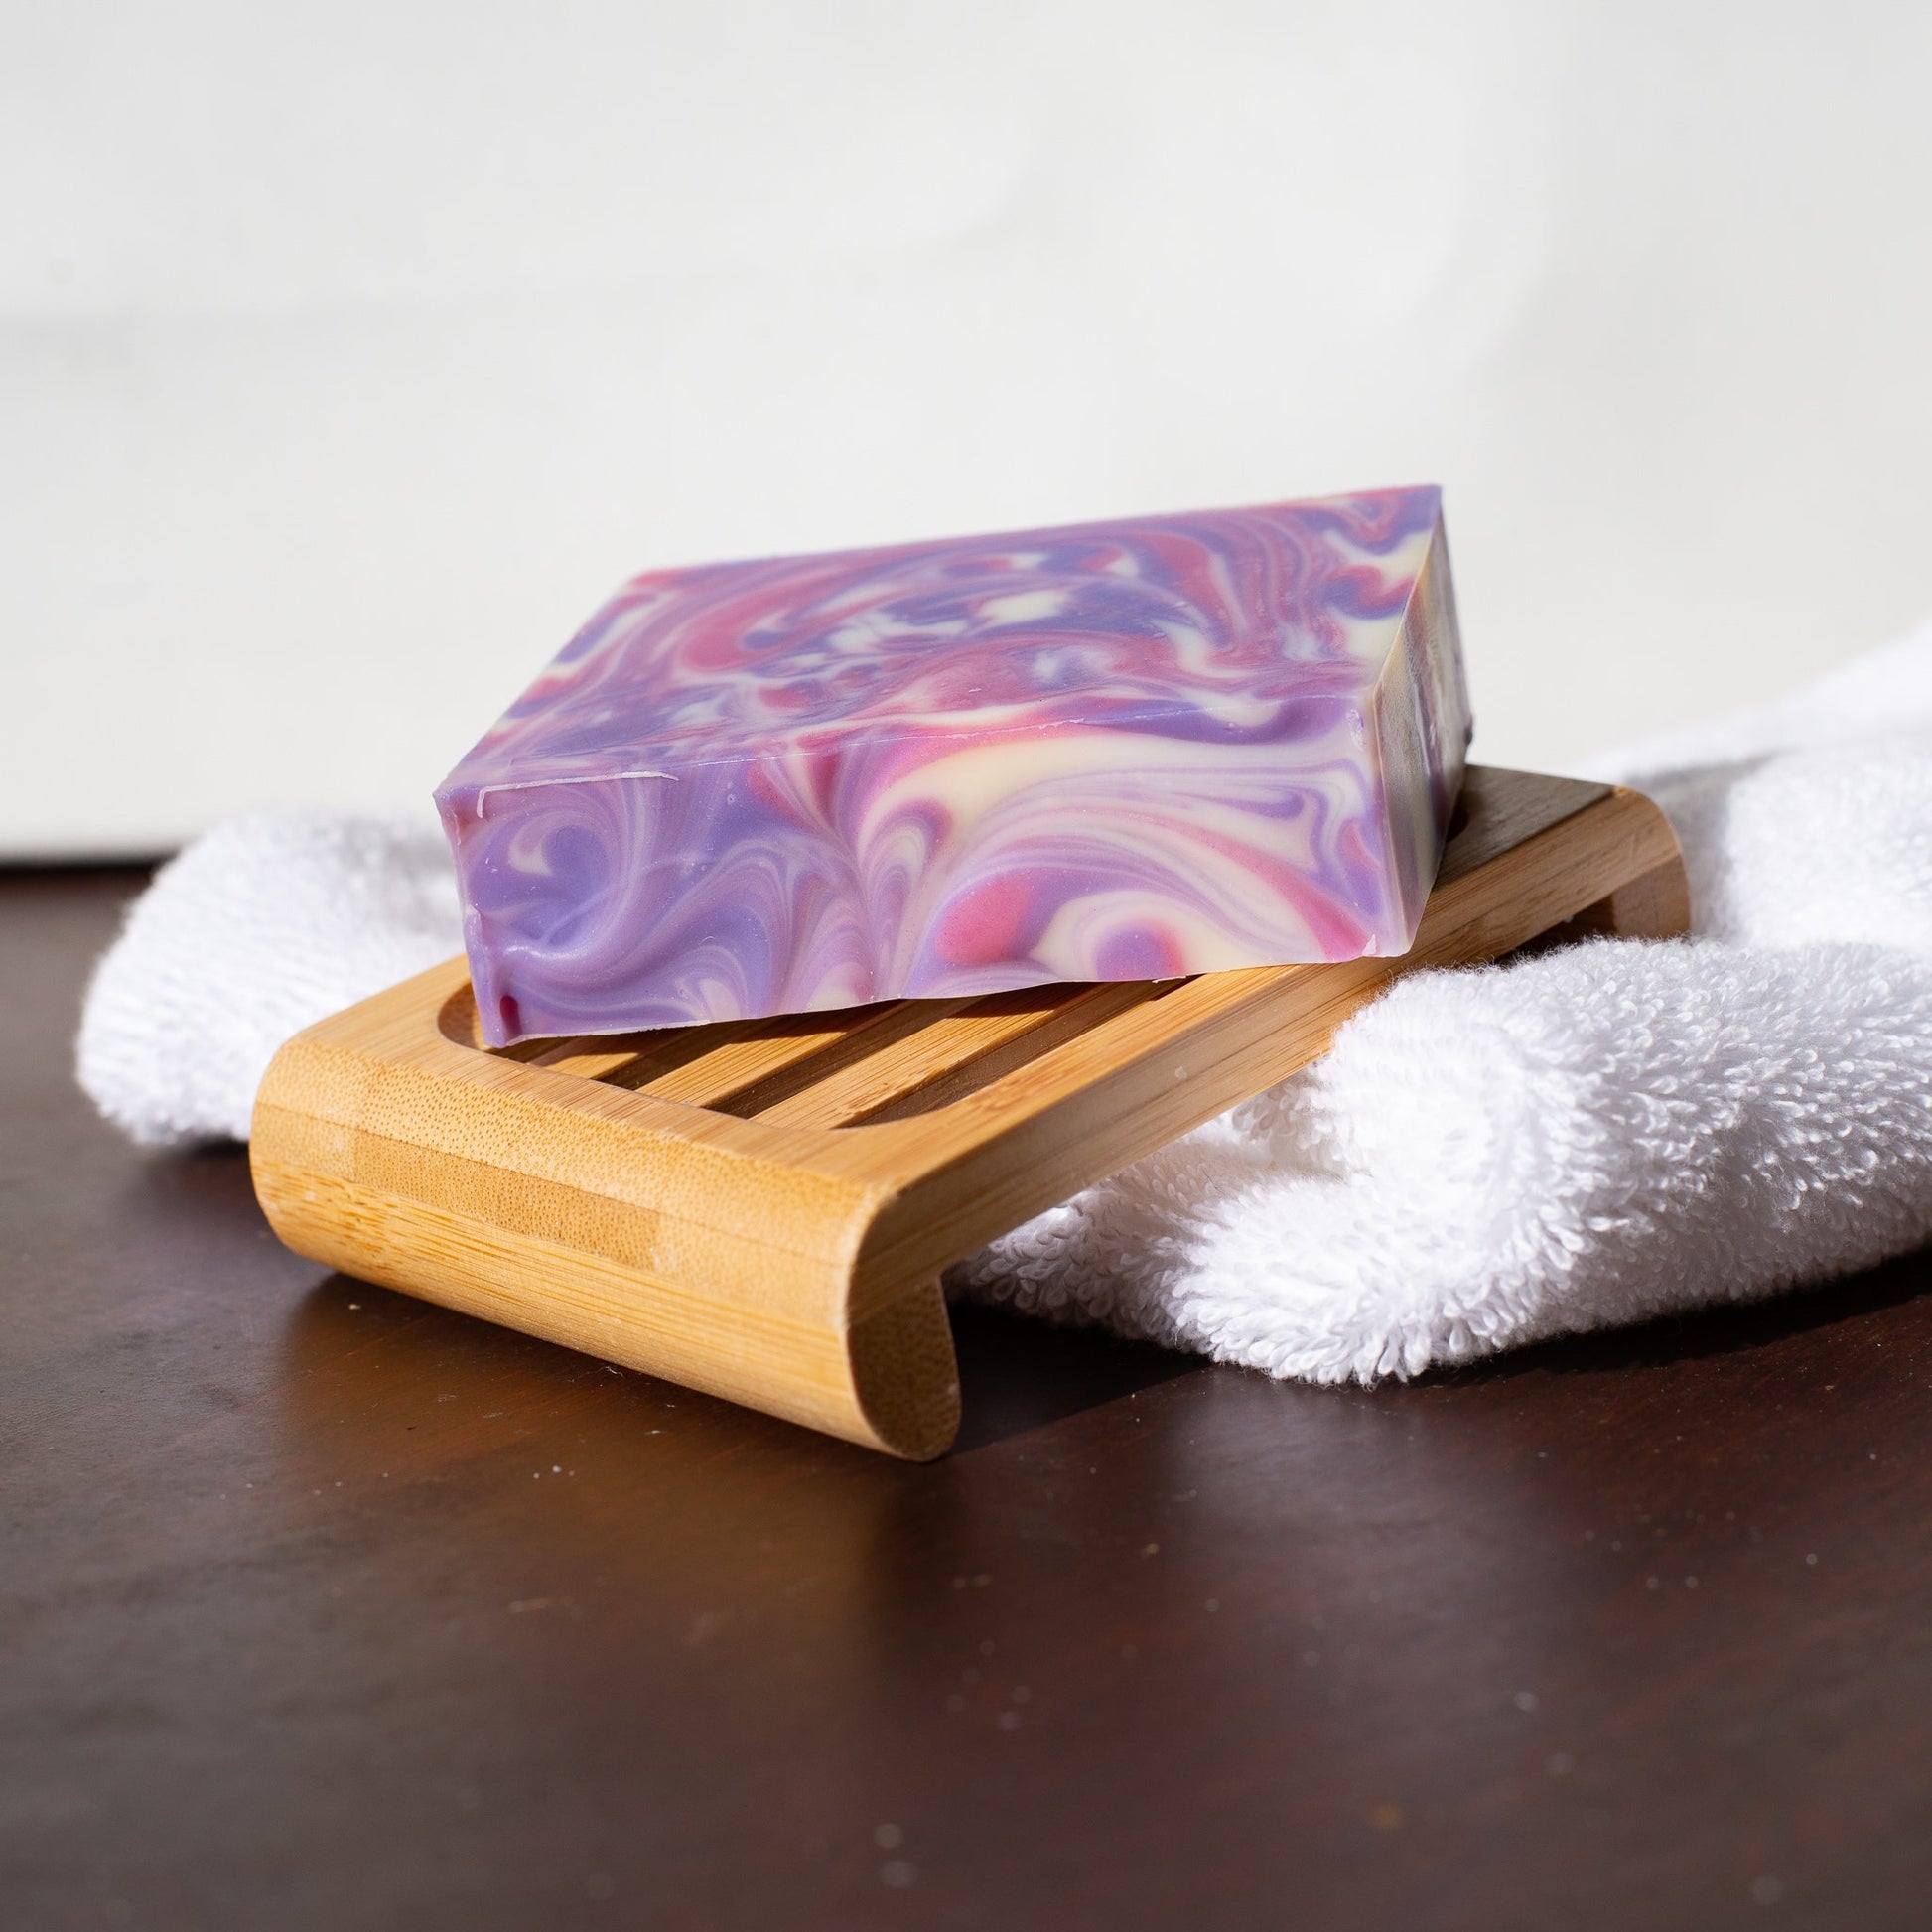 A bar of soap sitting on a soap dish and washcloth